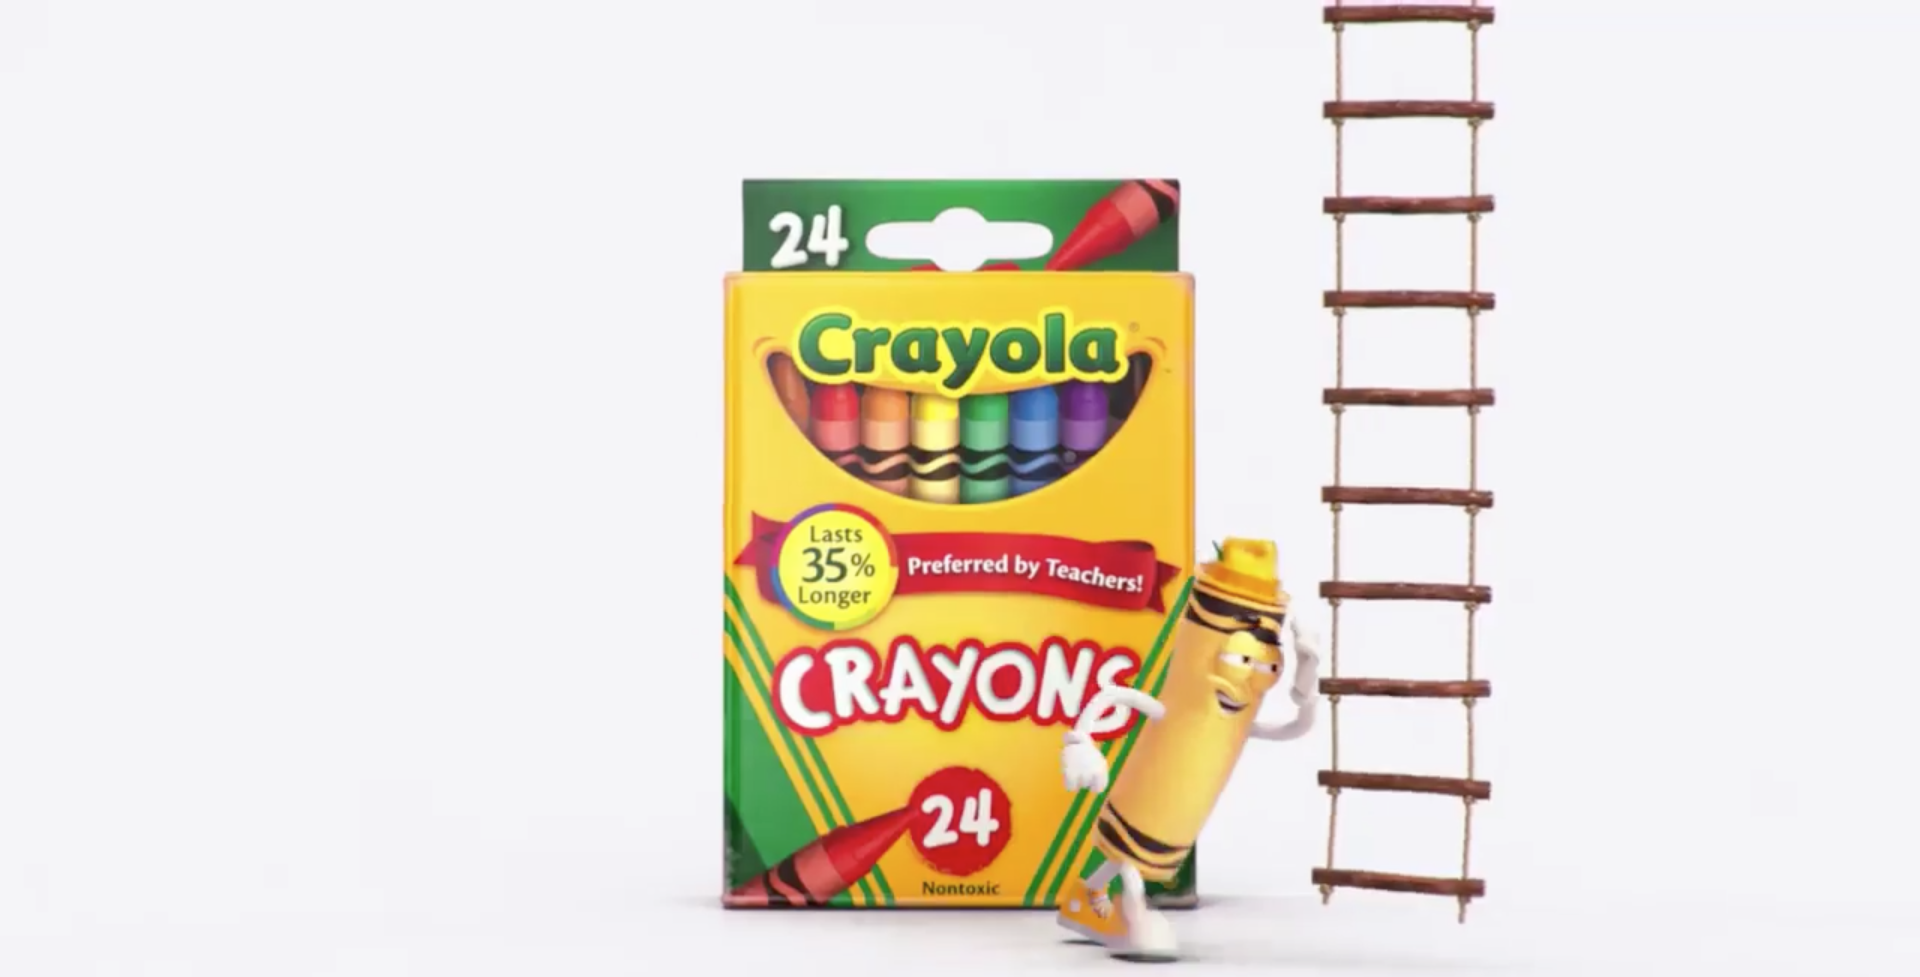 Crayola will retire its dandelion crayon and replace it in 24 packs of crayons.